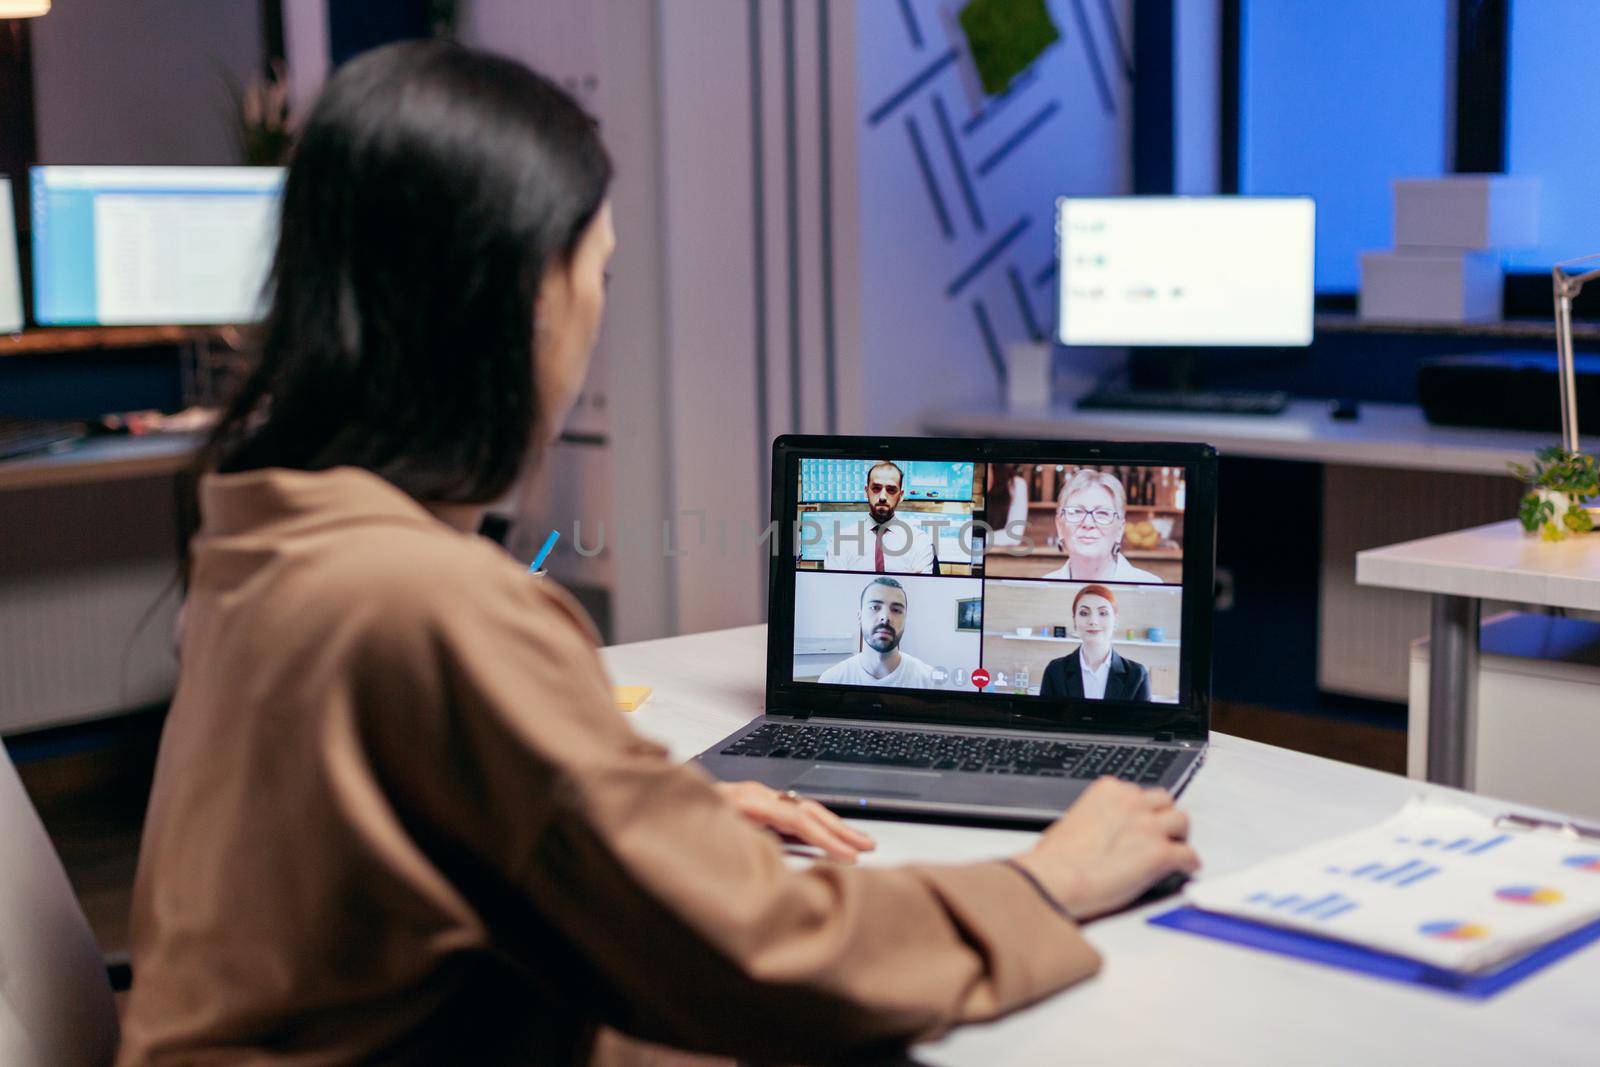 Entrepreneur talking in the course of online meeting with colleagues doing overtime. Woman working on finance during a video conference with coworkers at night hours in the office.